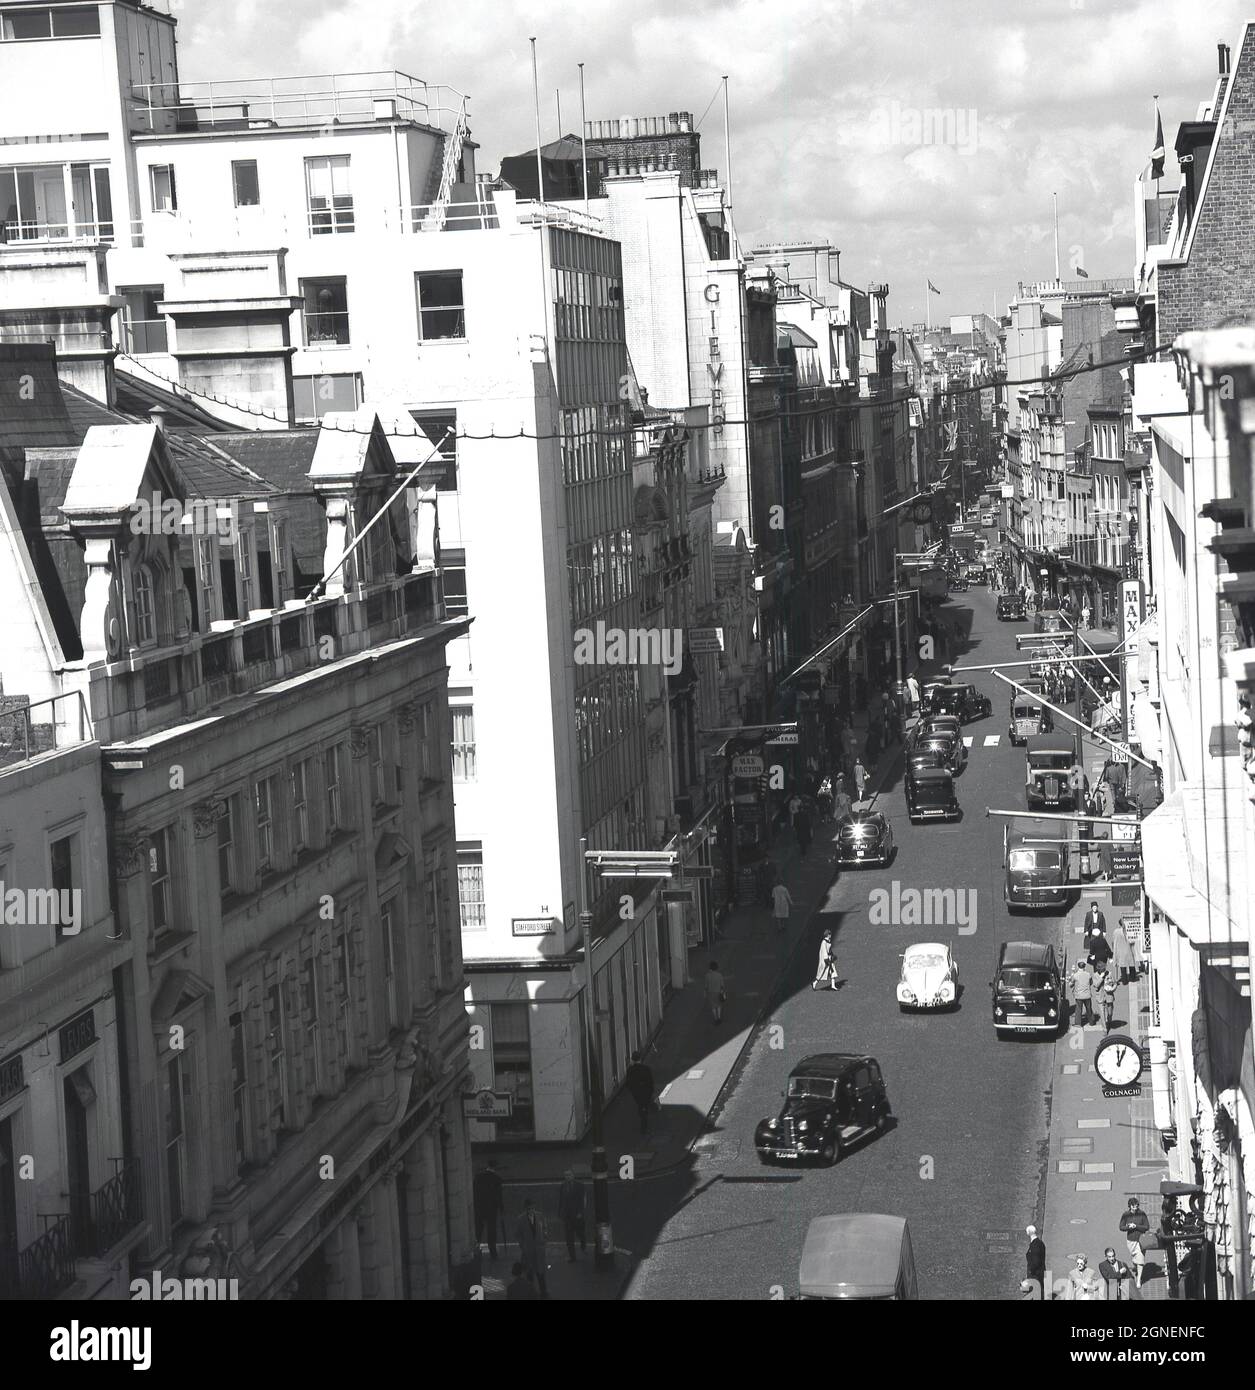 1960s, historical, Central London, overhead view of Old Bond Street in London's prestigious Mayfair district. Old Bond Street is the southern end of Bond Street, an area which since the 18th century has been the location for many elegant fashion stores, jewellers and auction houses. Stock Photo